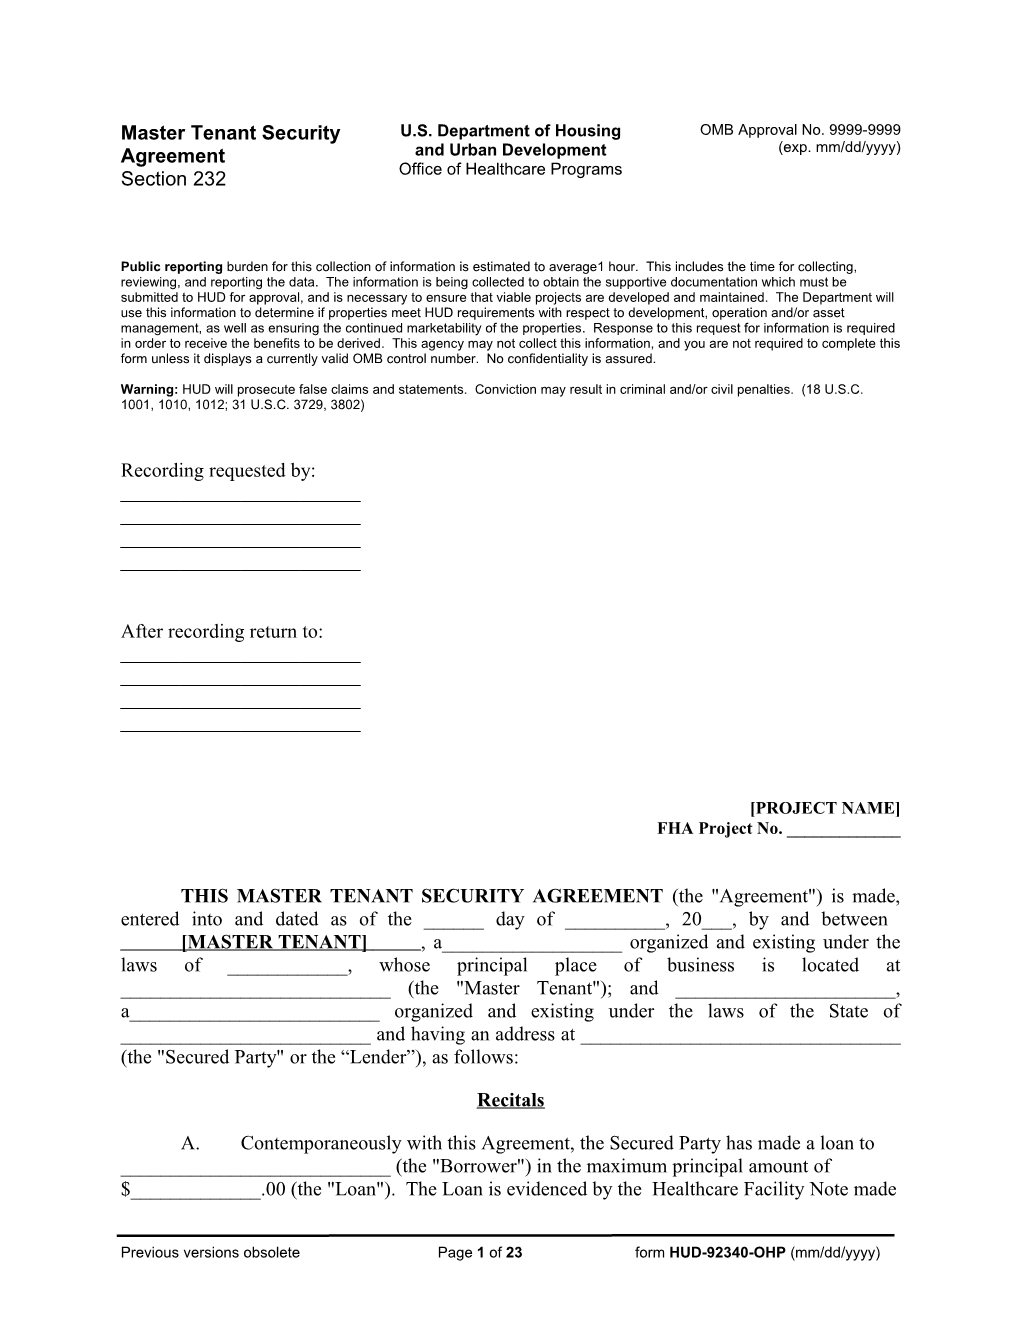 Security Agreement - Form